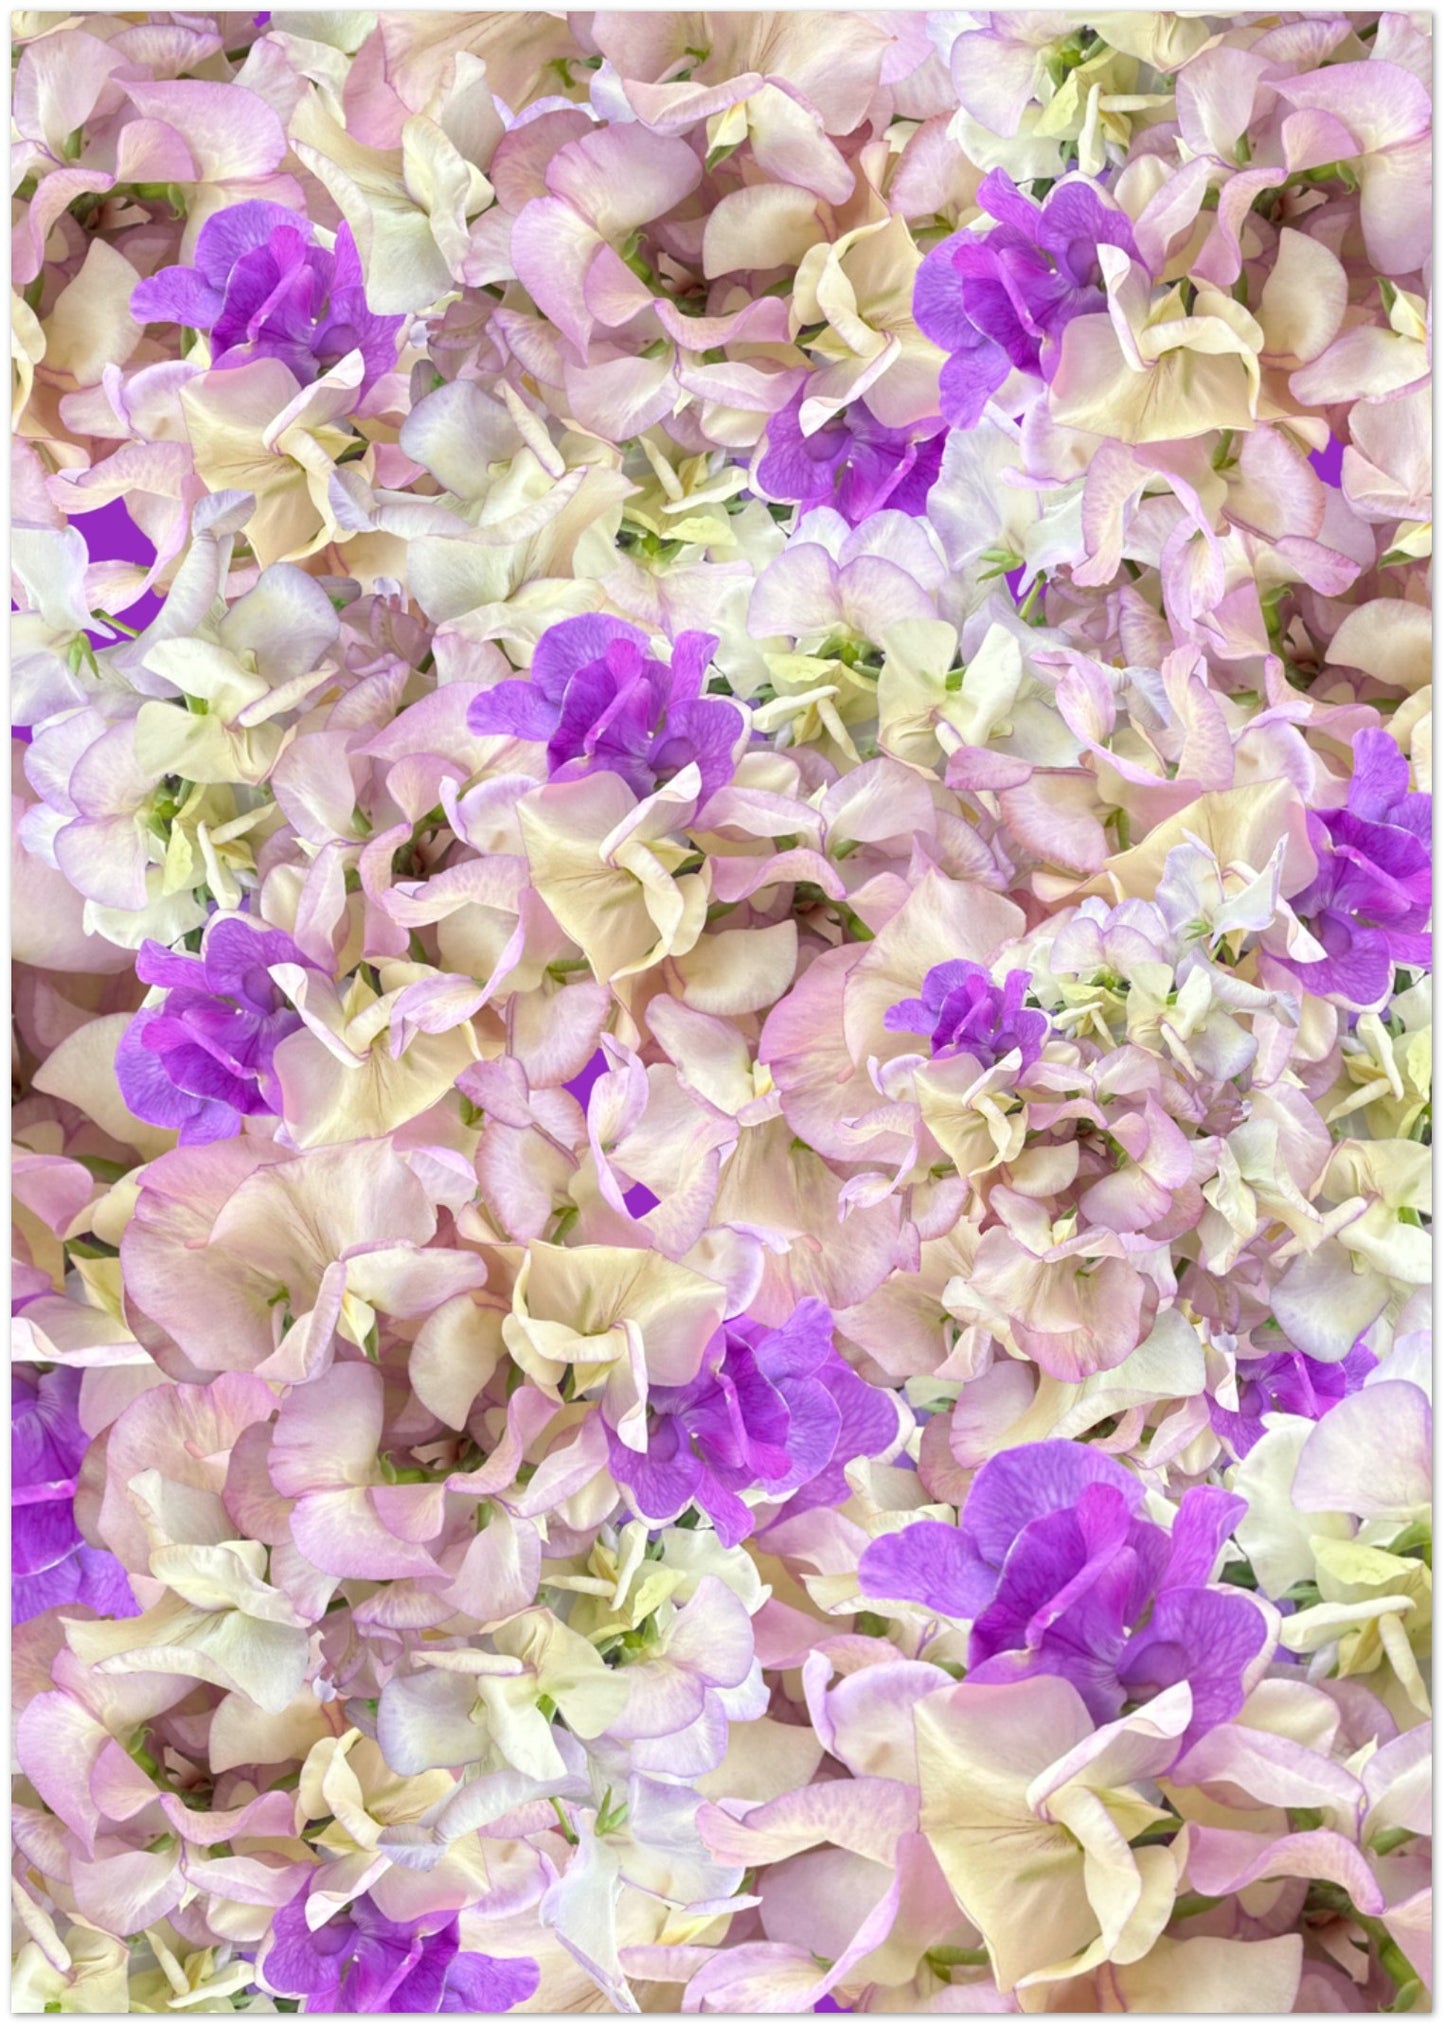 Sweetpea Greeting Card - Hugh's Garden for Mary Potter Hospice